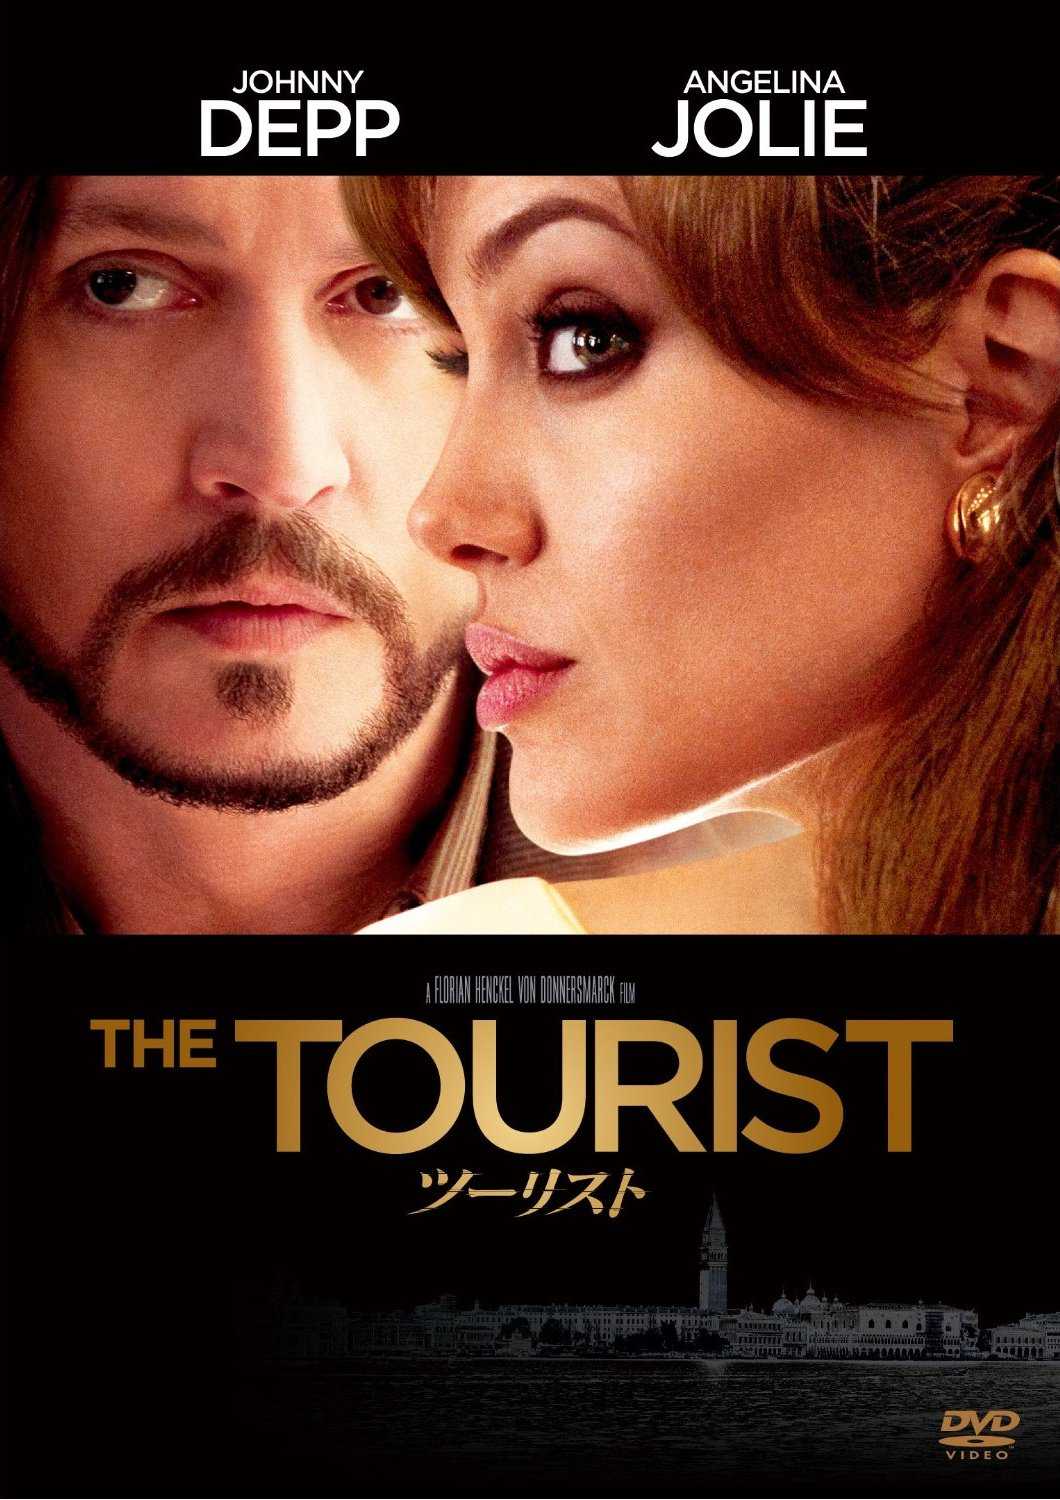 The tourist soundtrack - complete list of songs | whatsong